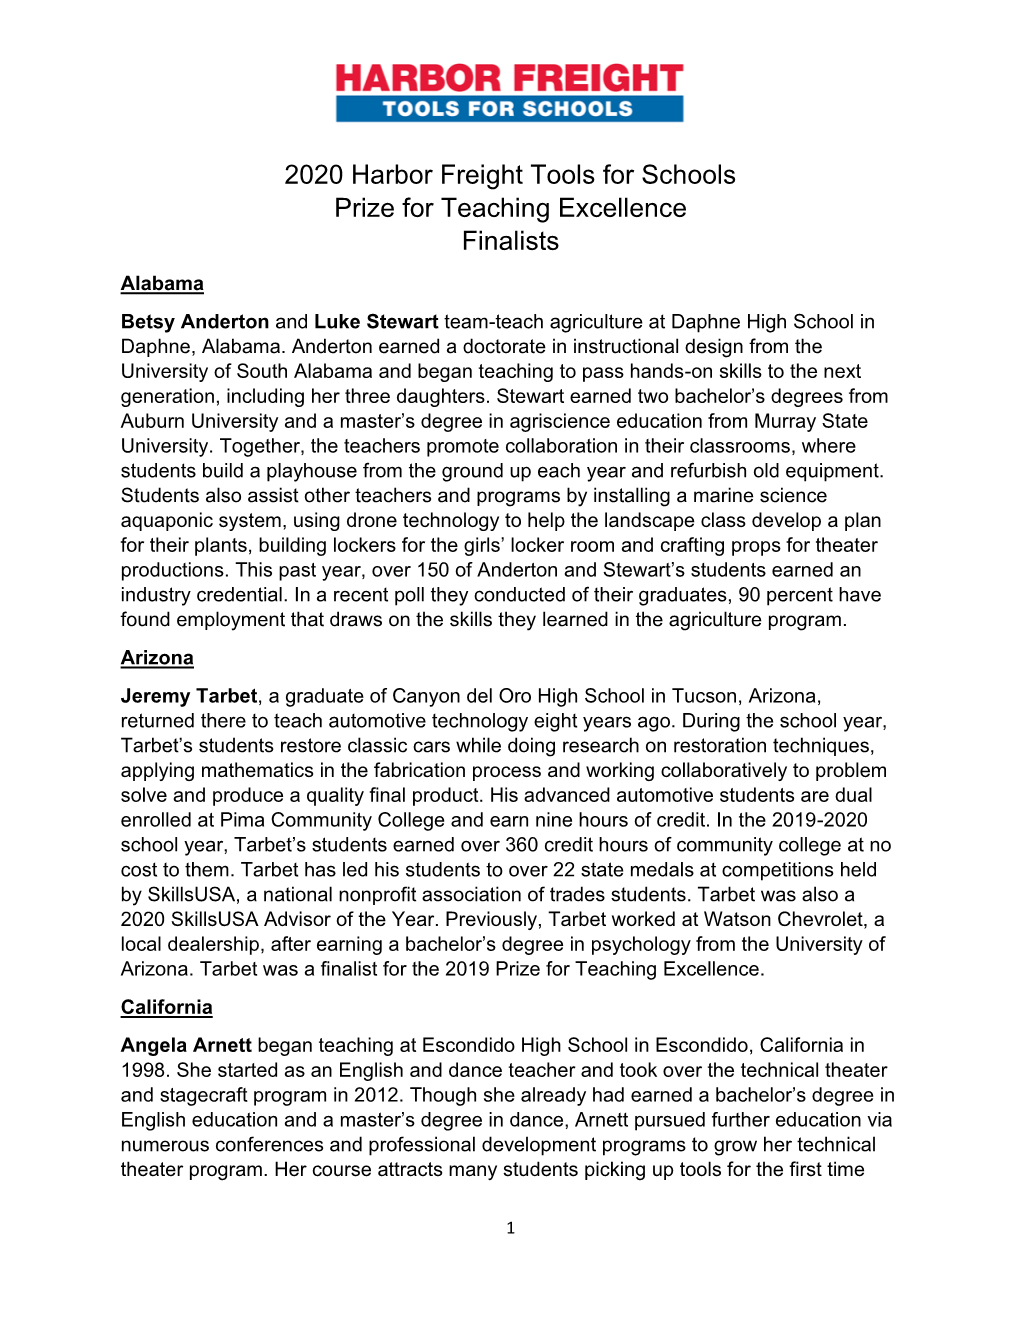 2020 Harbor Freight Tools for Schools Prize for Teaching Excellence